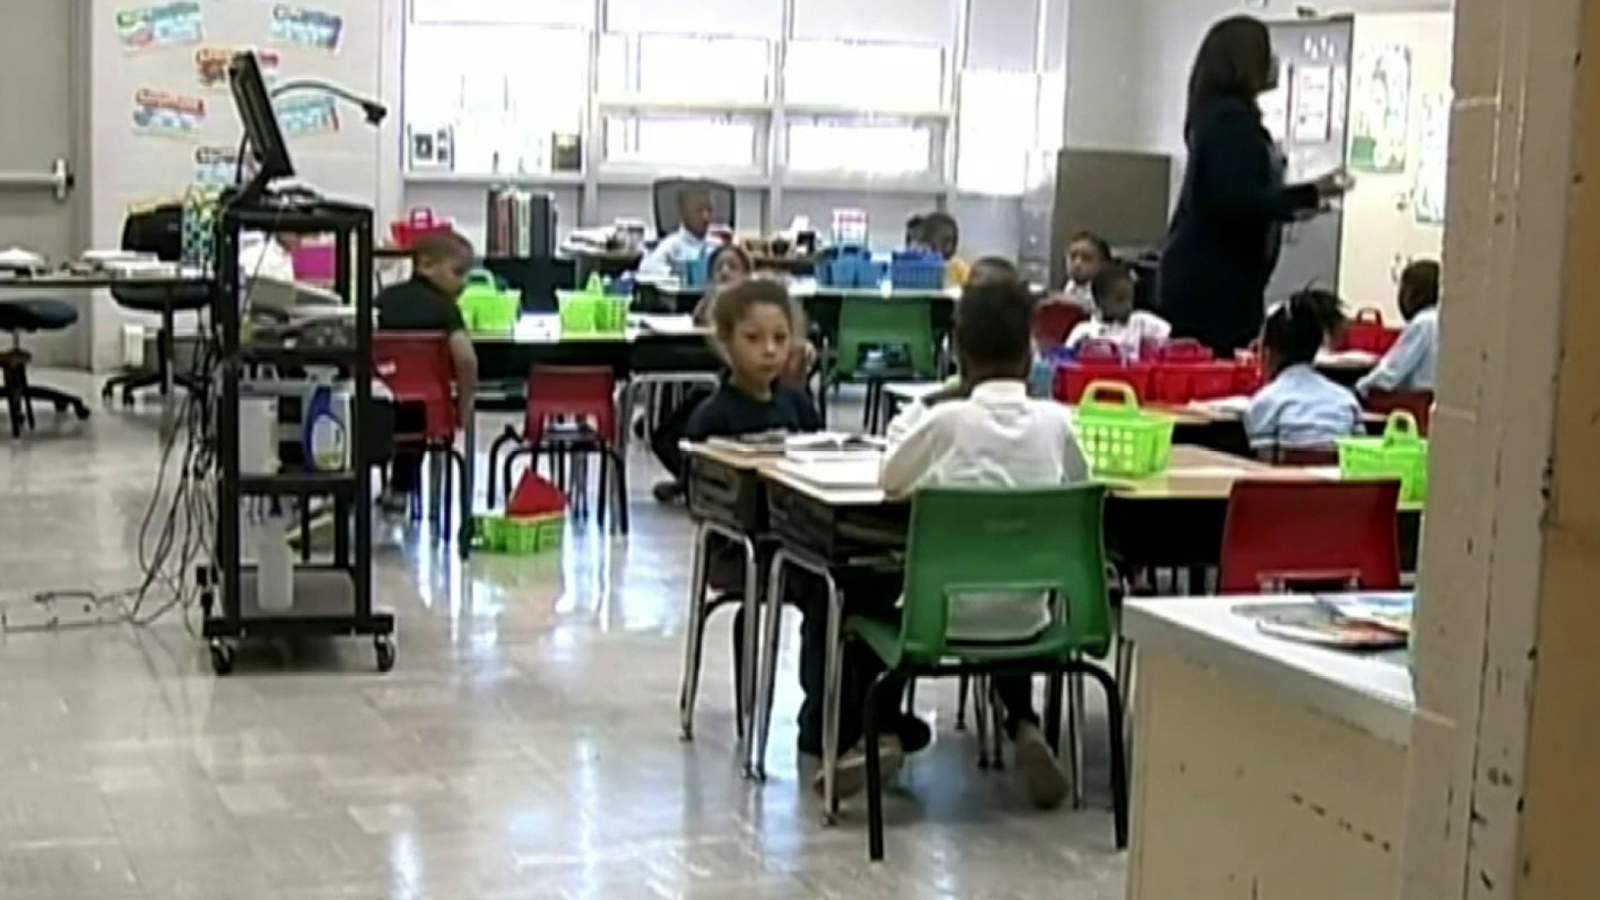 MEA Survey: class sizes, testing and more needs to change for school in the fall